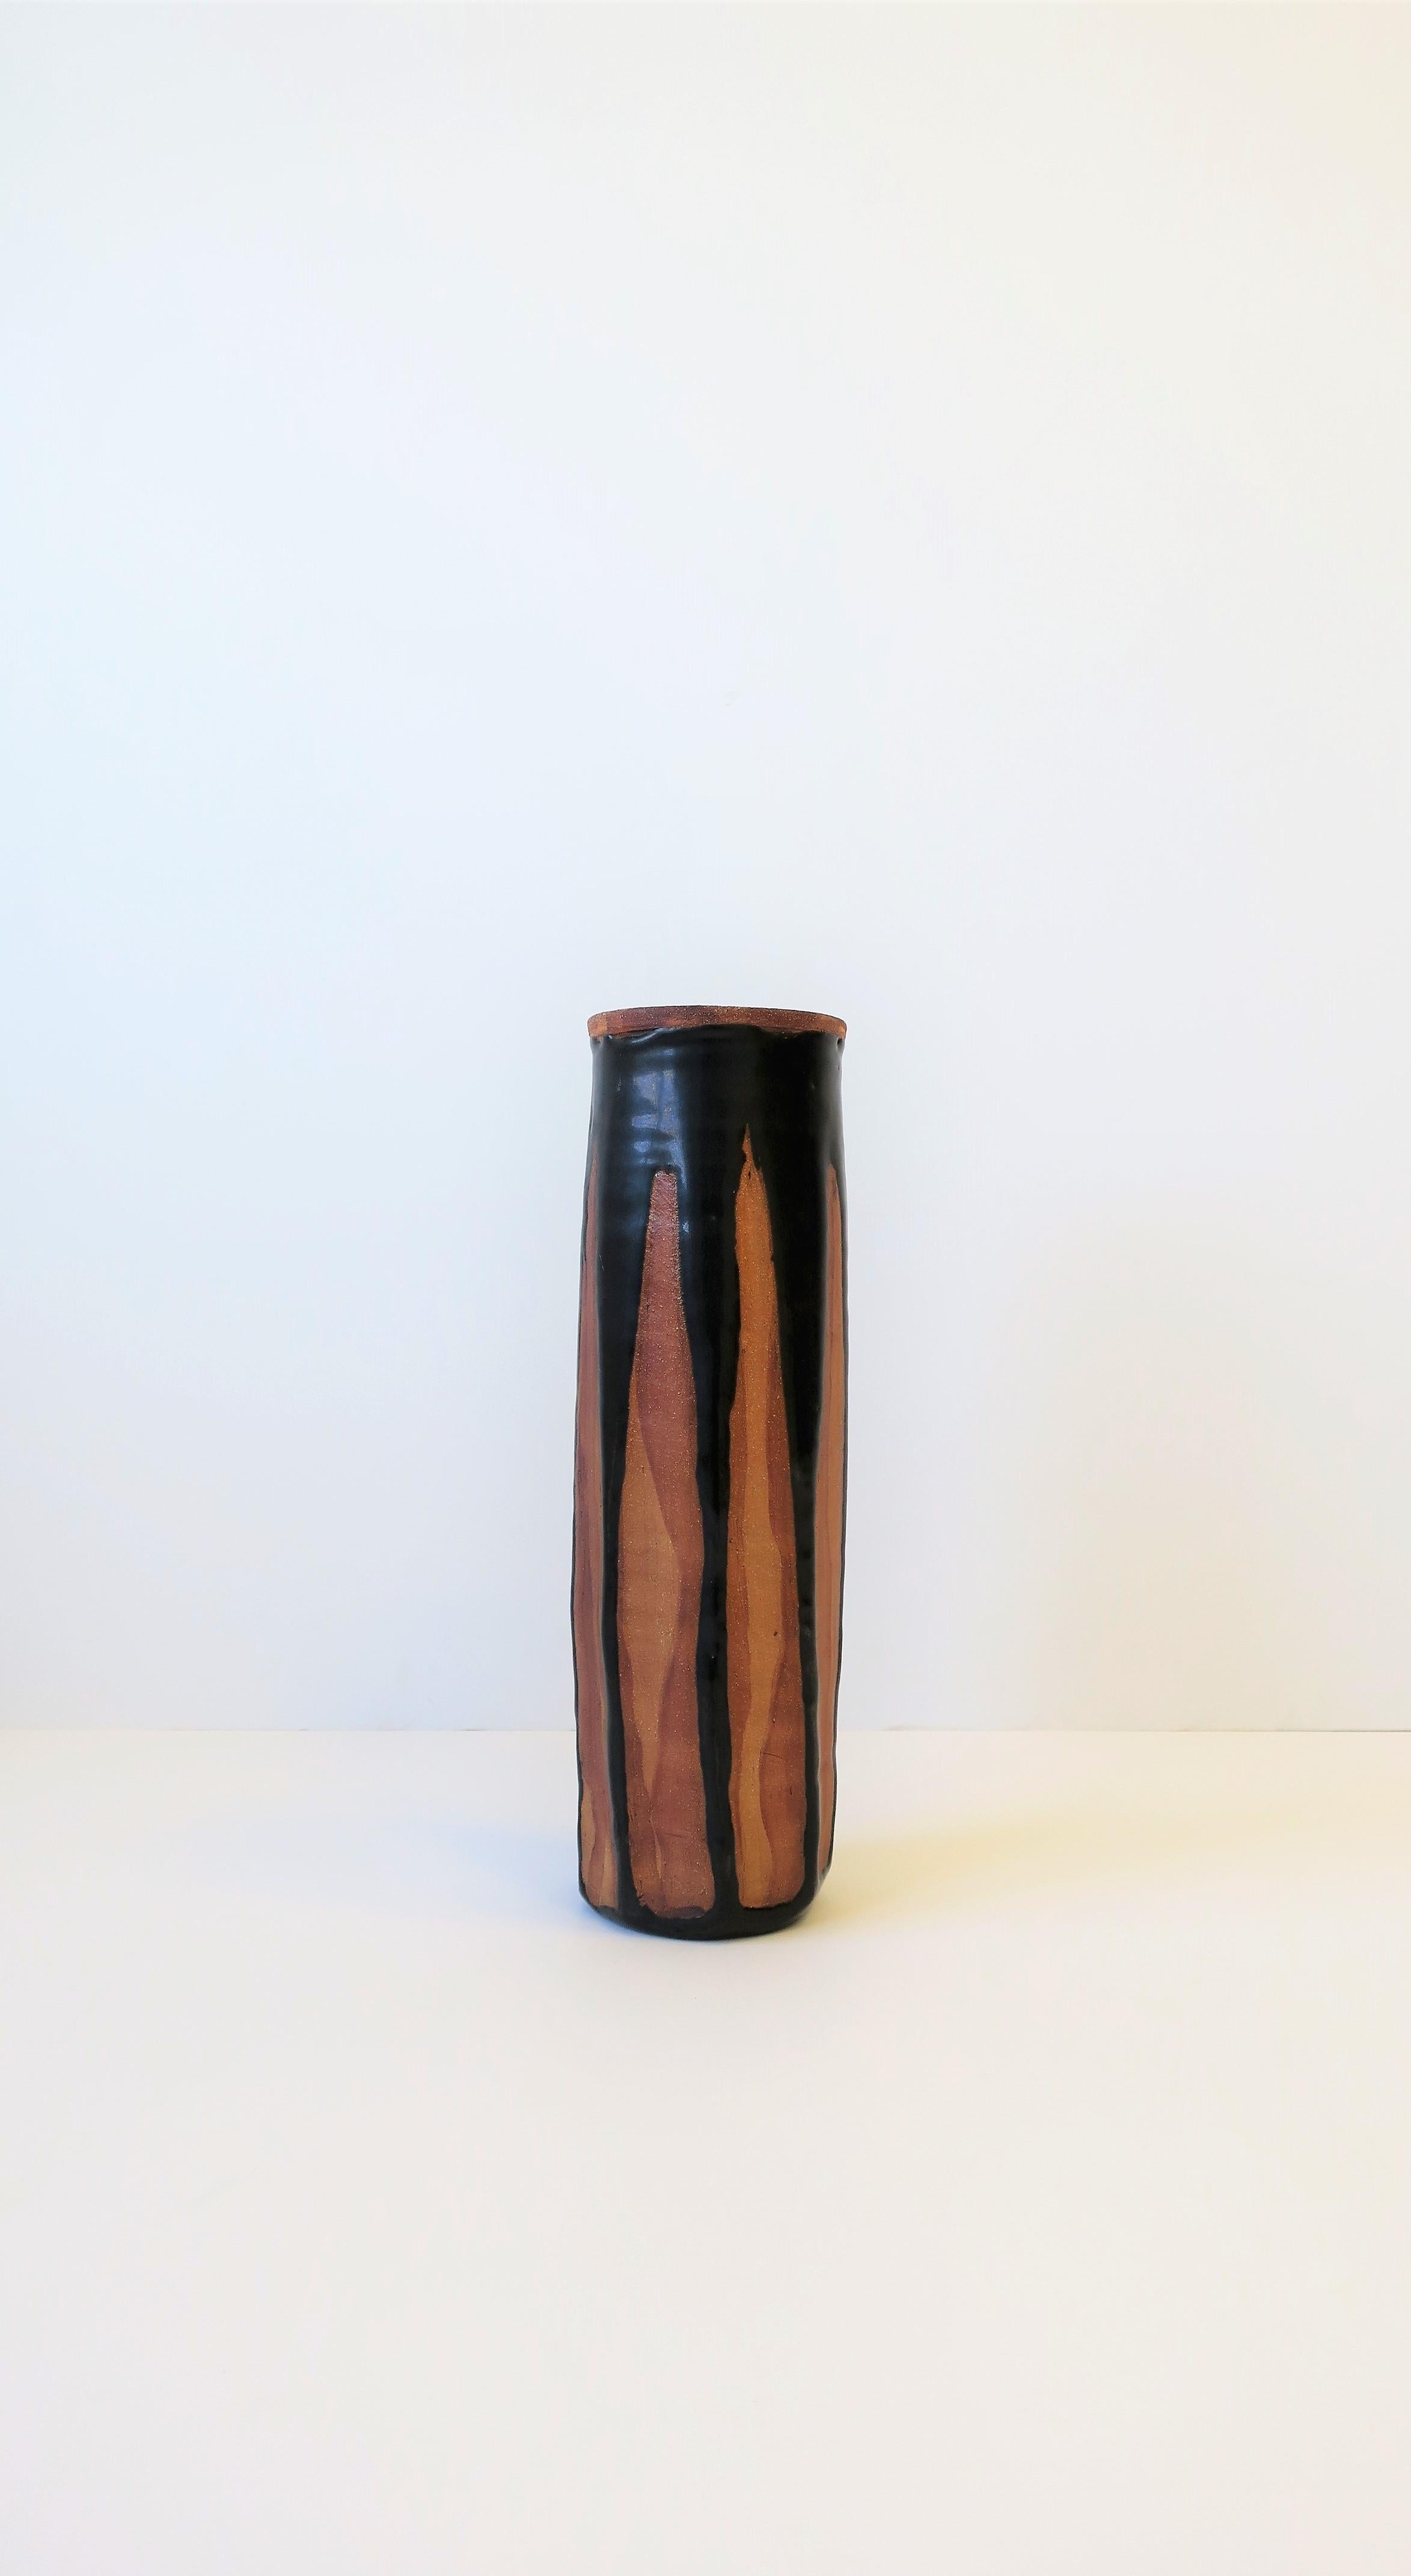 A beautiful black and terracotta studio pottery vase with octagonal design, circa 1960s-1970s. Vase is signed on bottom as show in image #11. 

Vase measures: 3.5